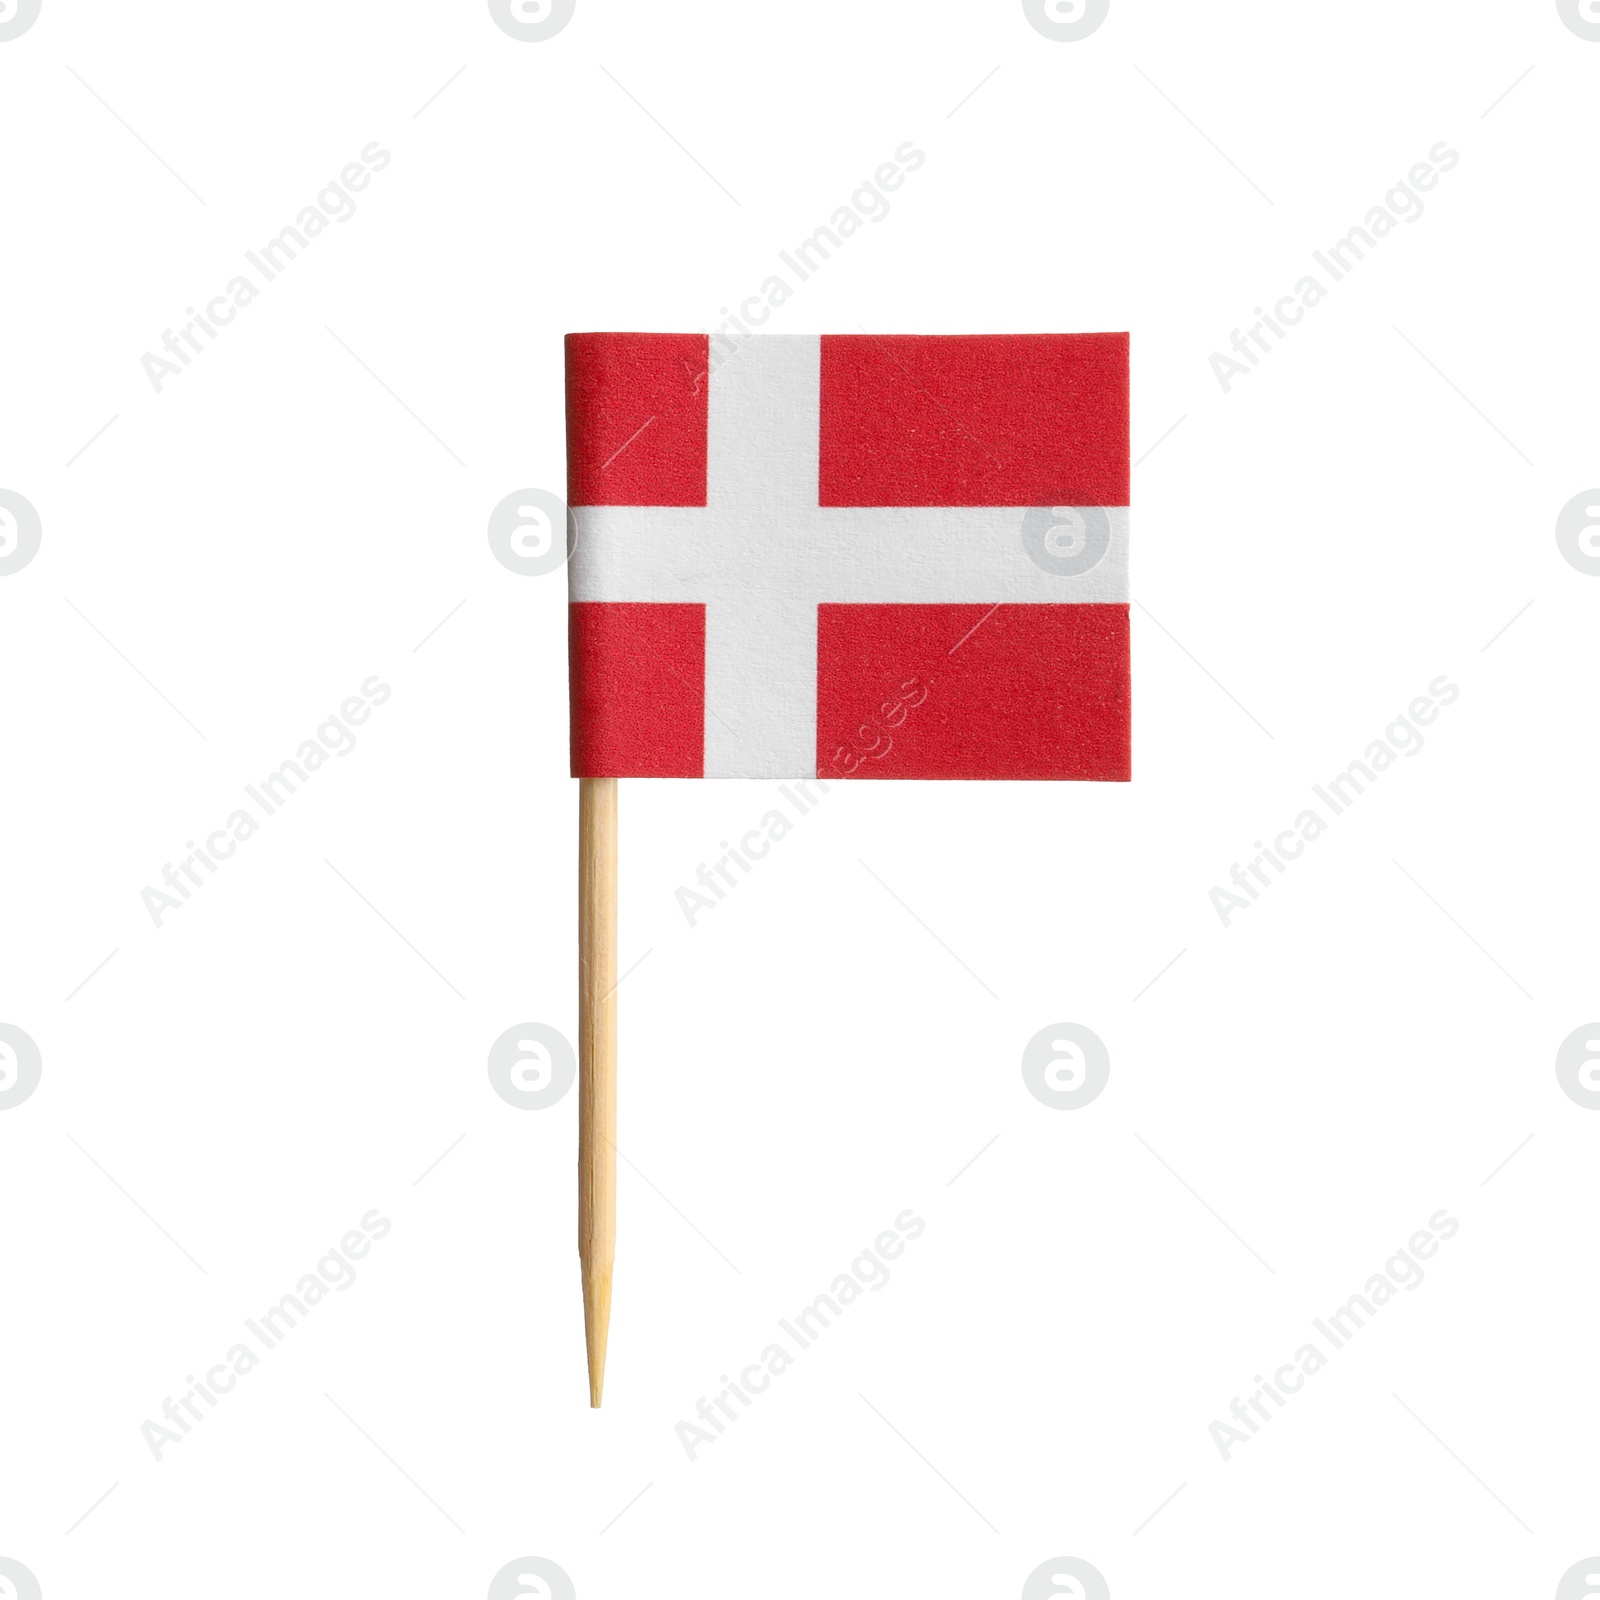 Photo of Small paper flag of Dania isolated on white